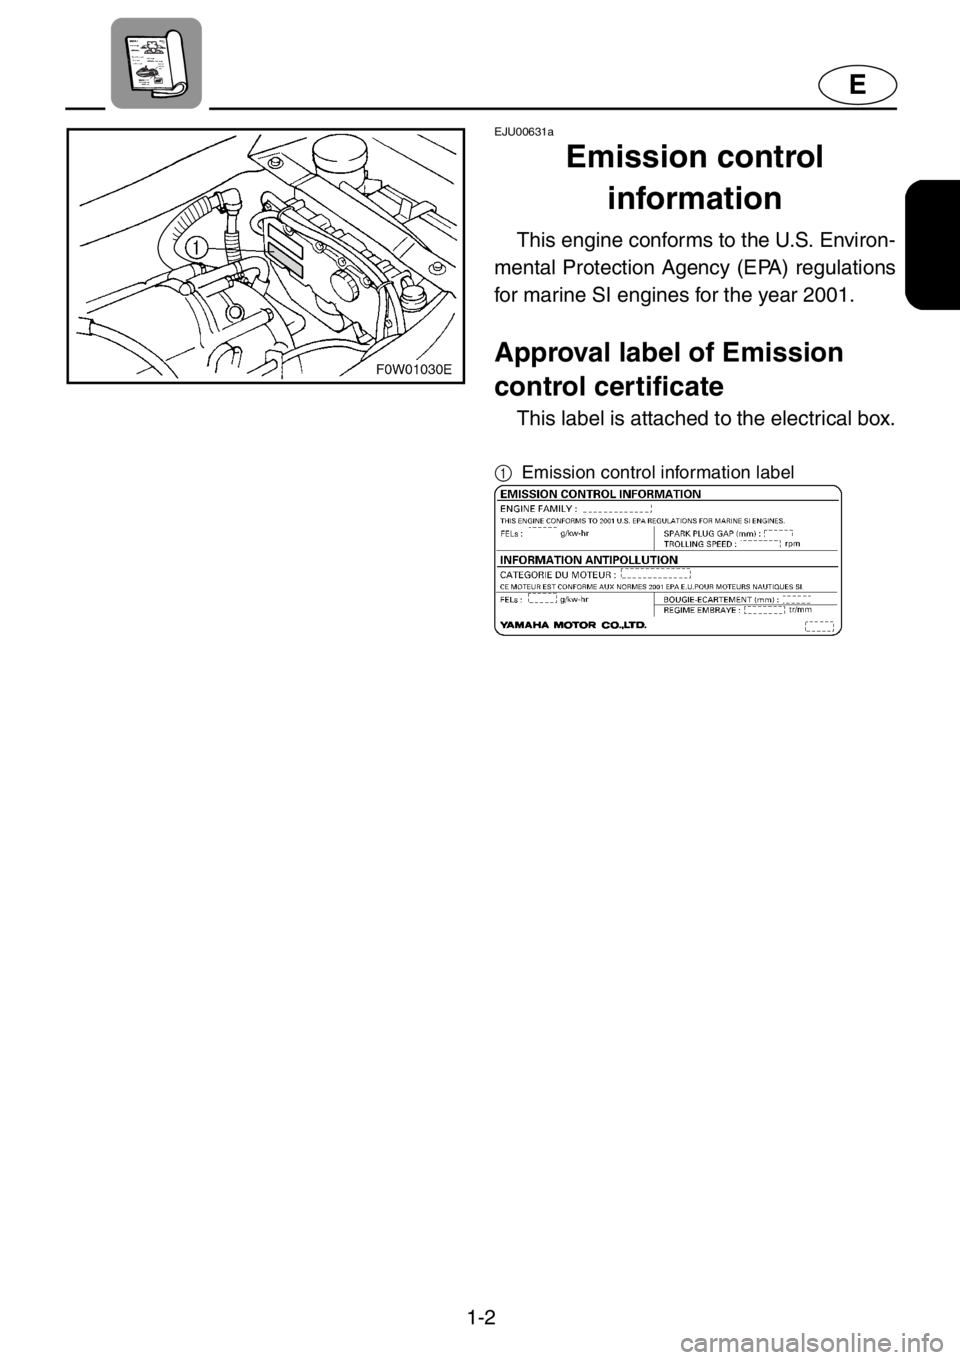 YAMAHA GP800R 2021  Owners Manual 1-2
E
EJU00631a
Emission control 
information
This engine conforms to the U.S. Environ-
mental Protection Agency (EPA) regulations
for marine SI engines for the year 2001.
Approval label of Emission 
